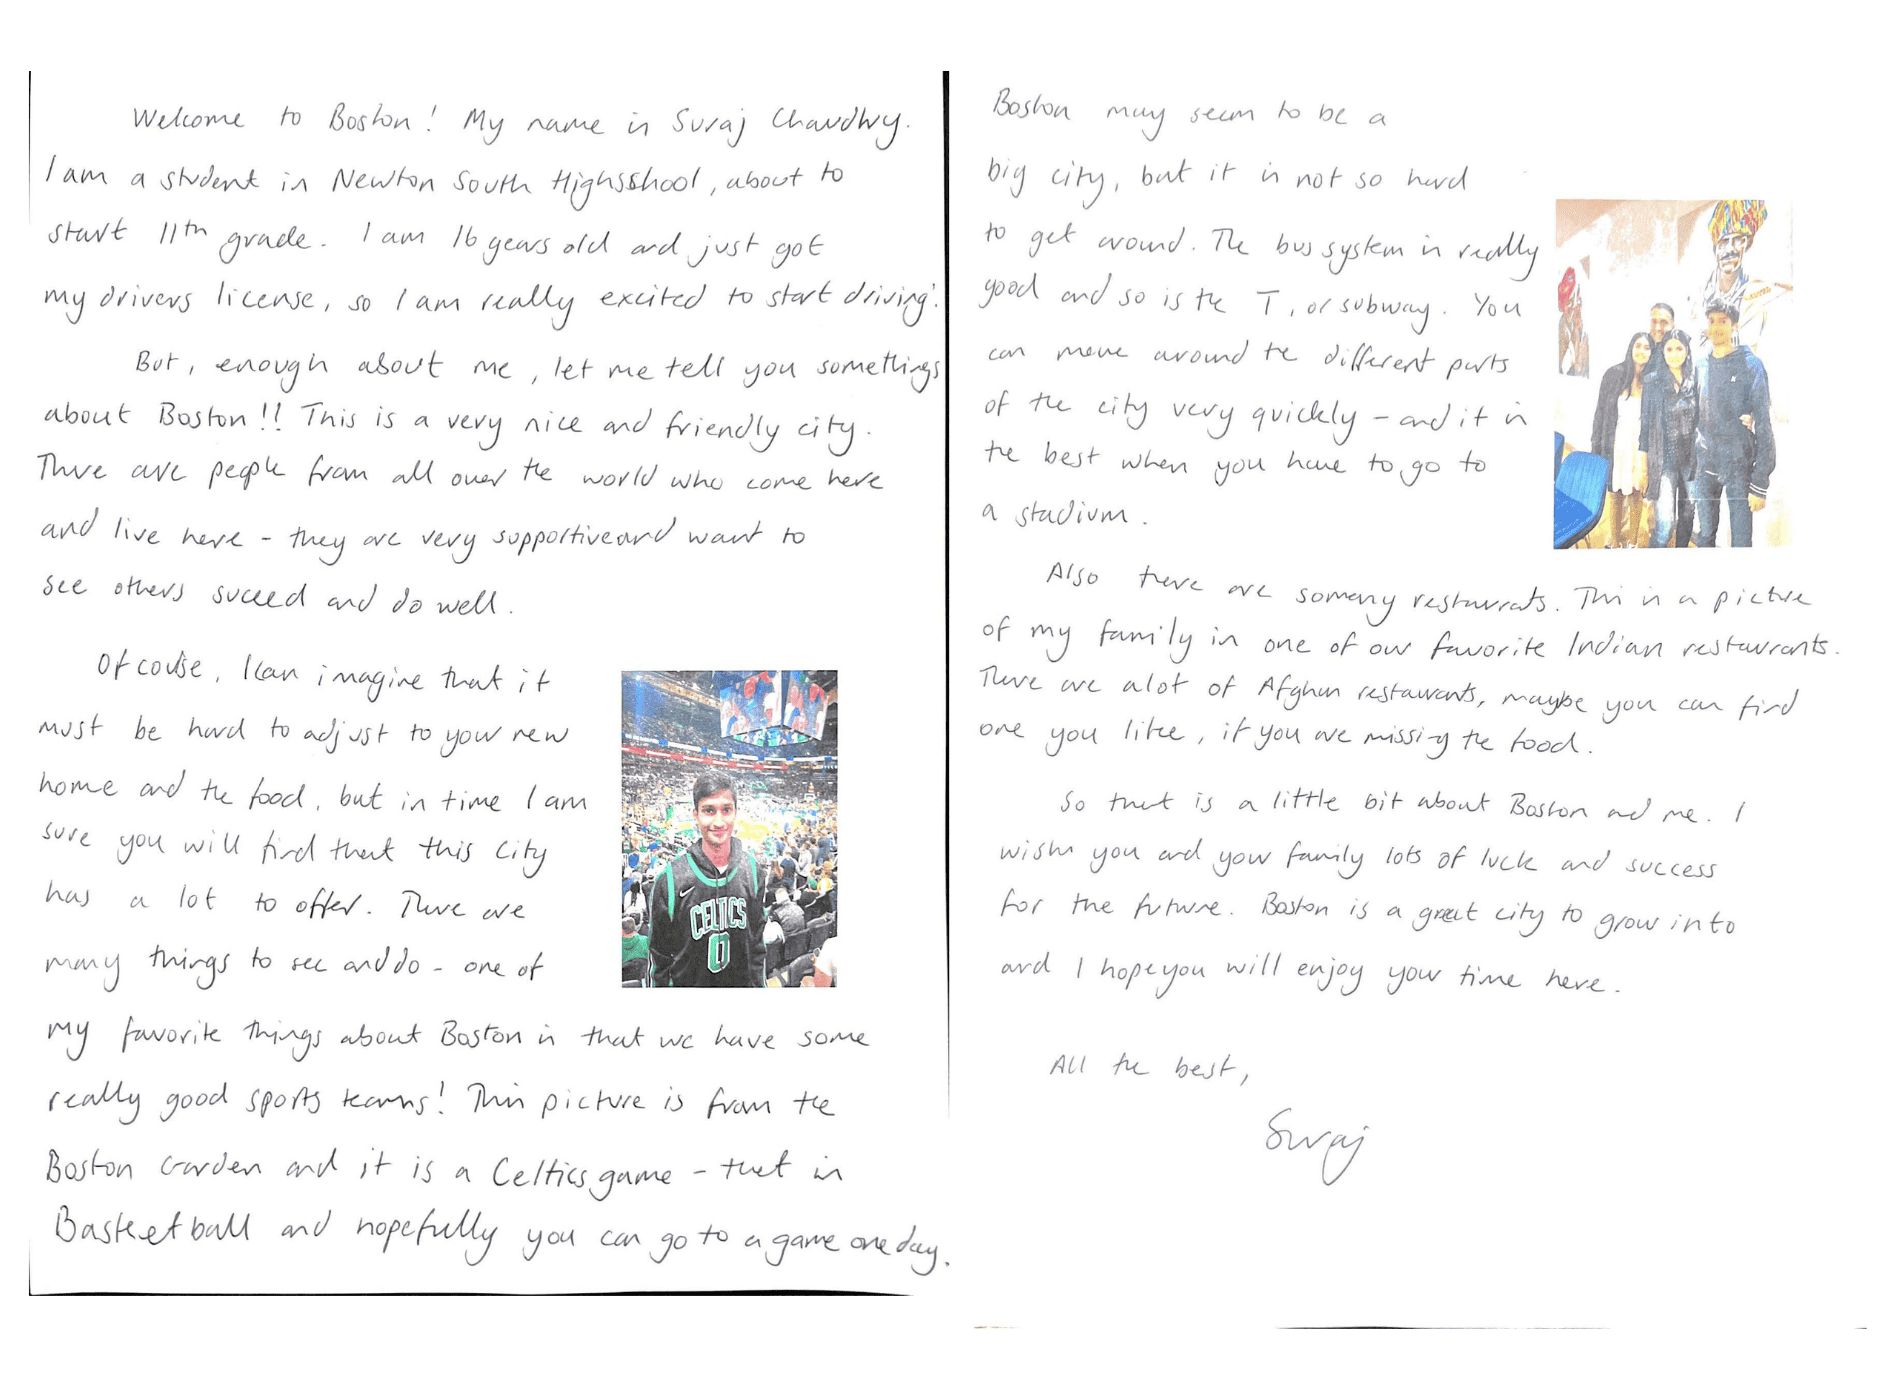 Suraj's hand-written letter was delivered to a newly arrived Afghan family